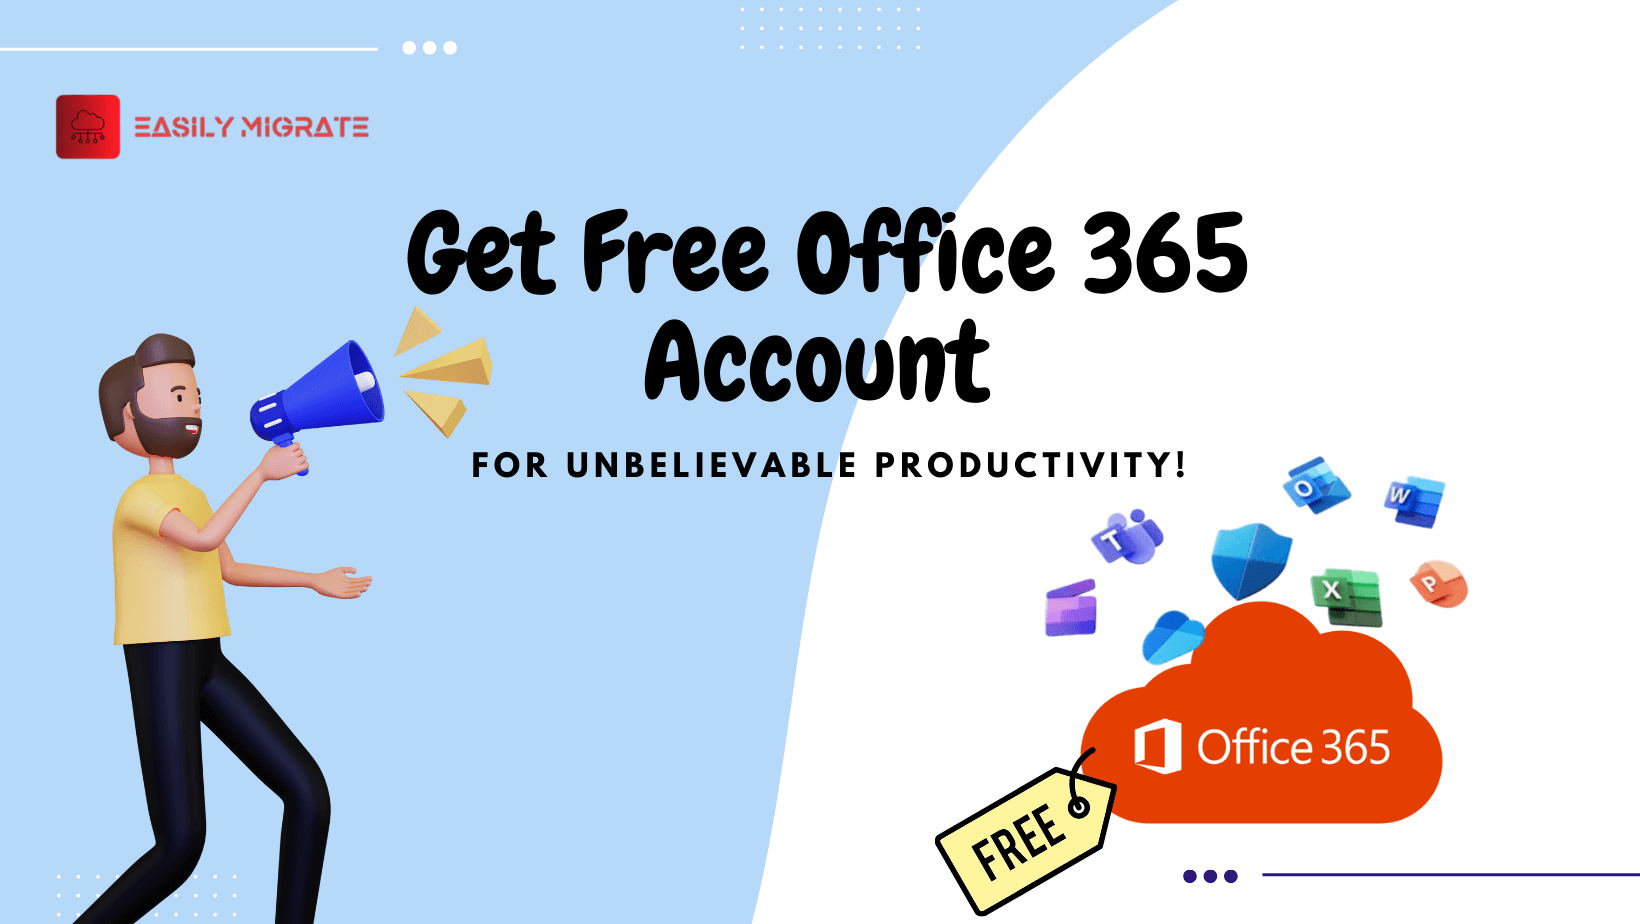 Get Free Office 365 Account for Unbelievable Productivity!